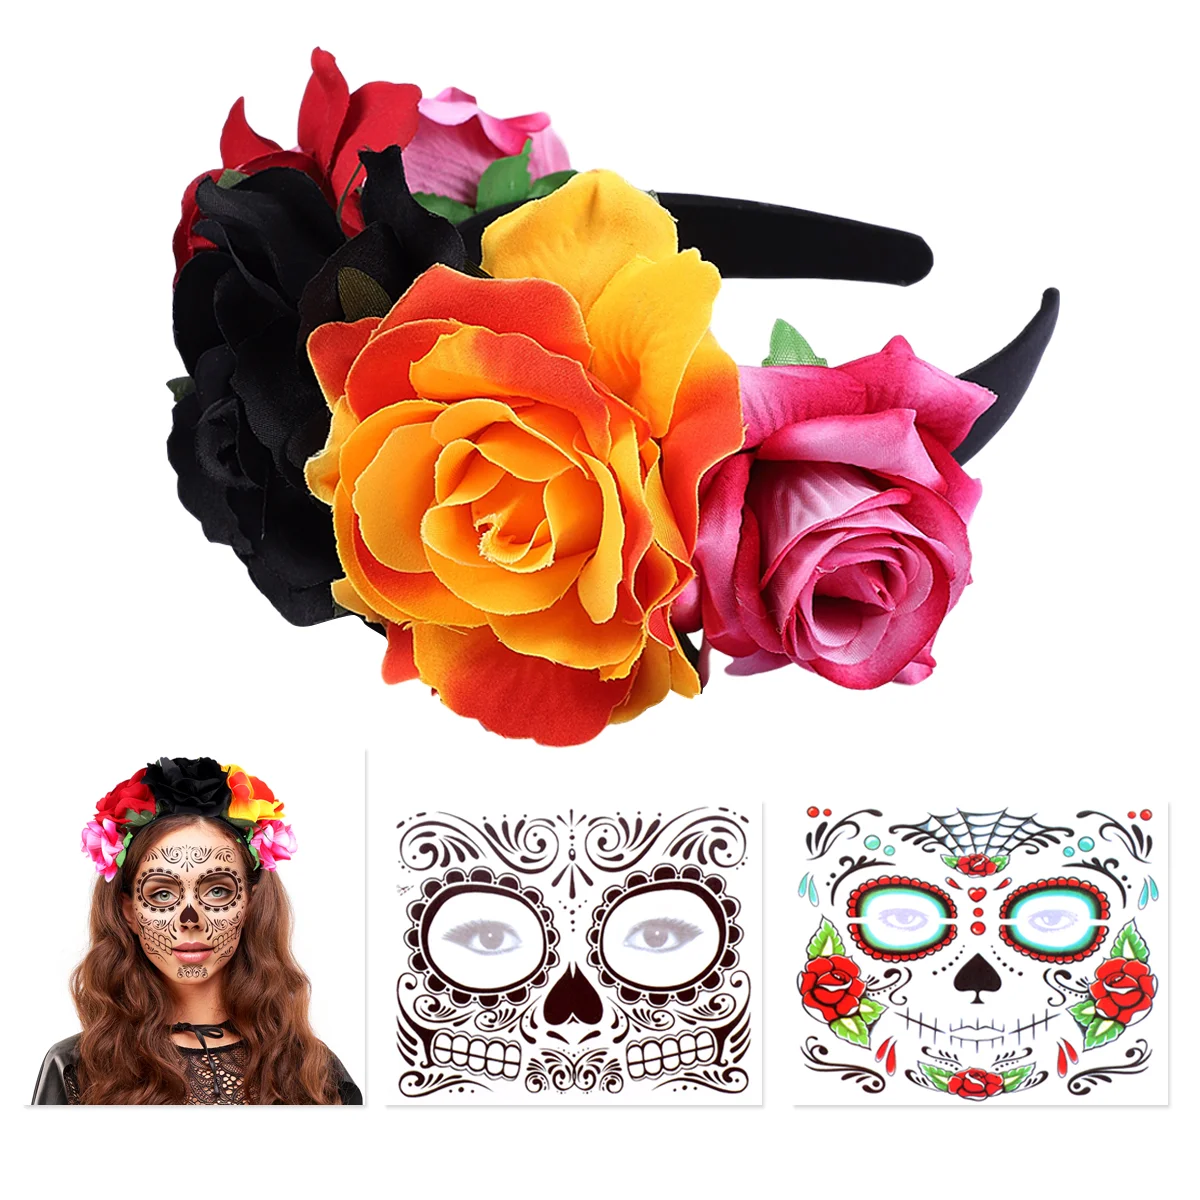 

Frcolor Rose Flower Headband and 2 Sheets Face Tattoos Vintage Rose Headpiece Hair with Stickers for Women Ladies Girls